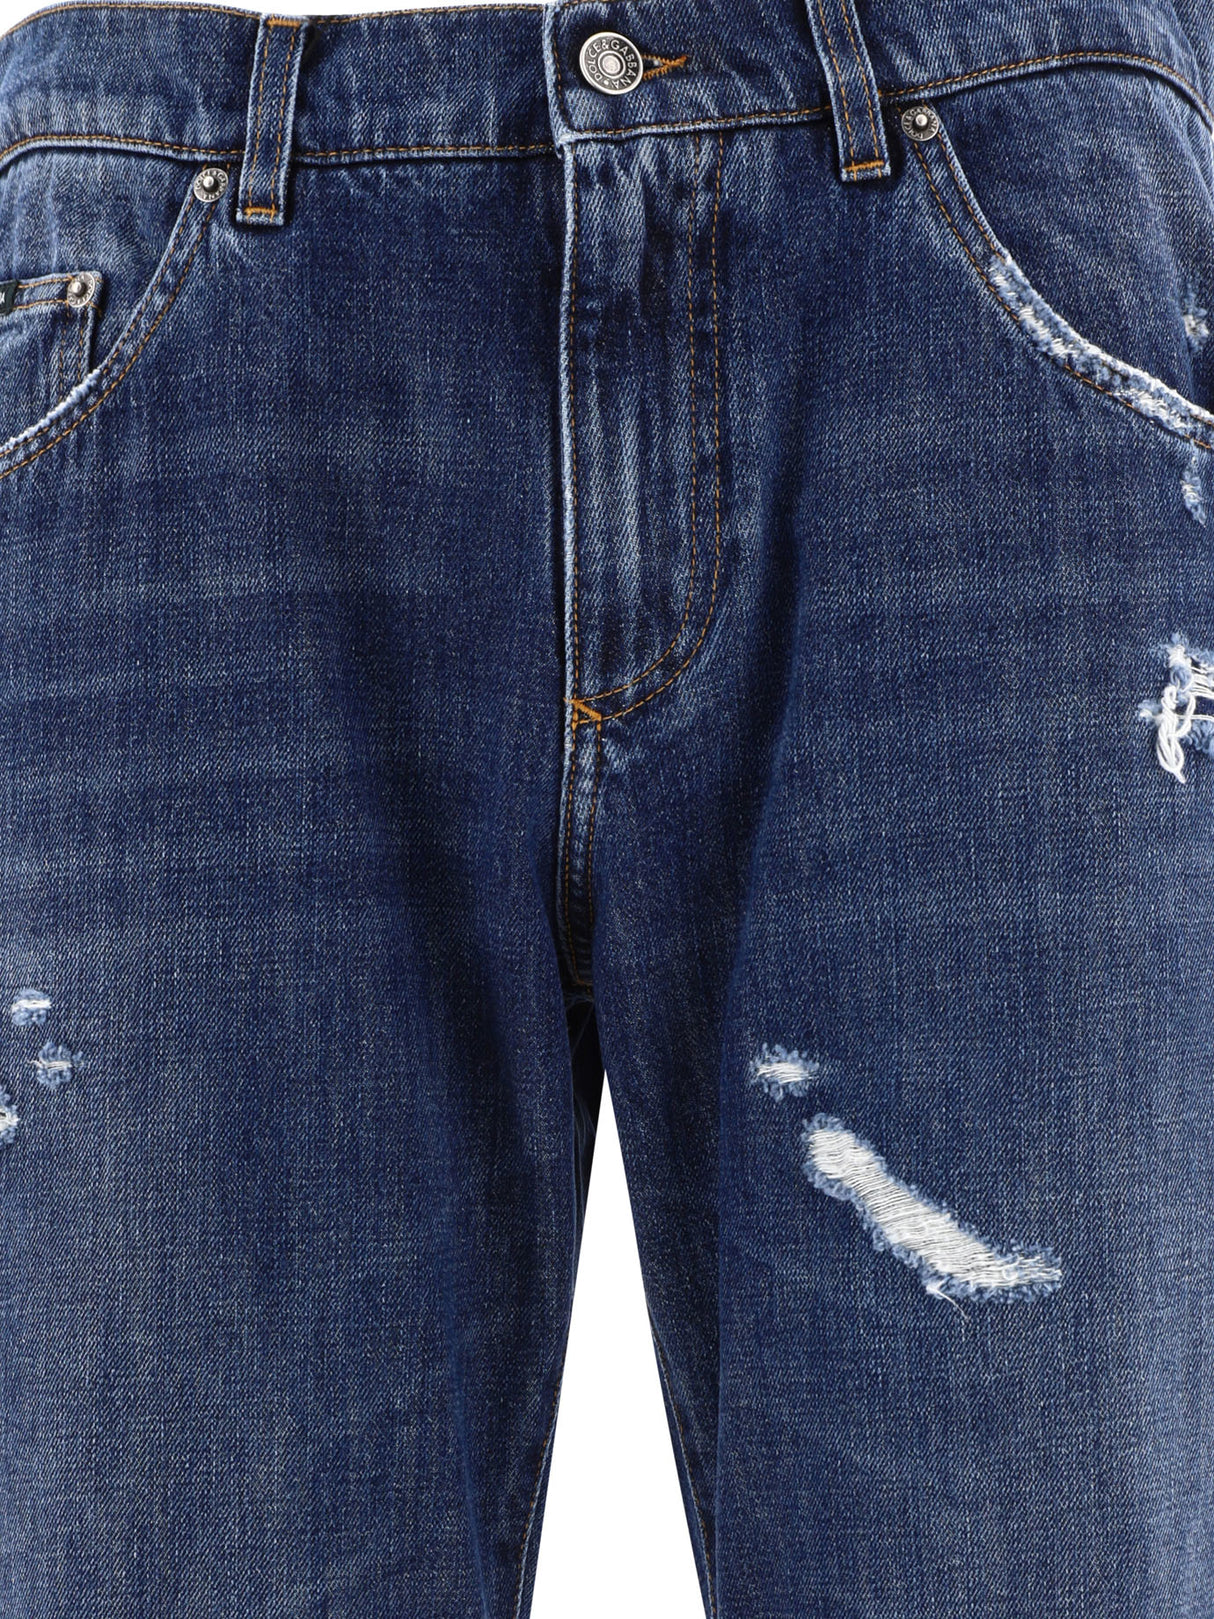 DOLCE & GABBANA Stylish Men's Straight Leg Jeans in Ripped Details